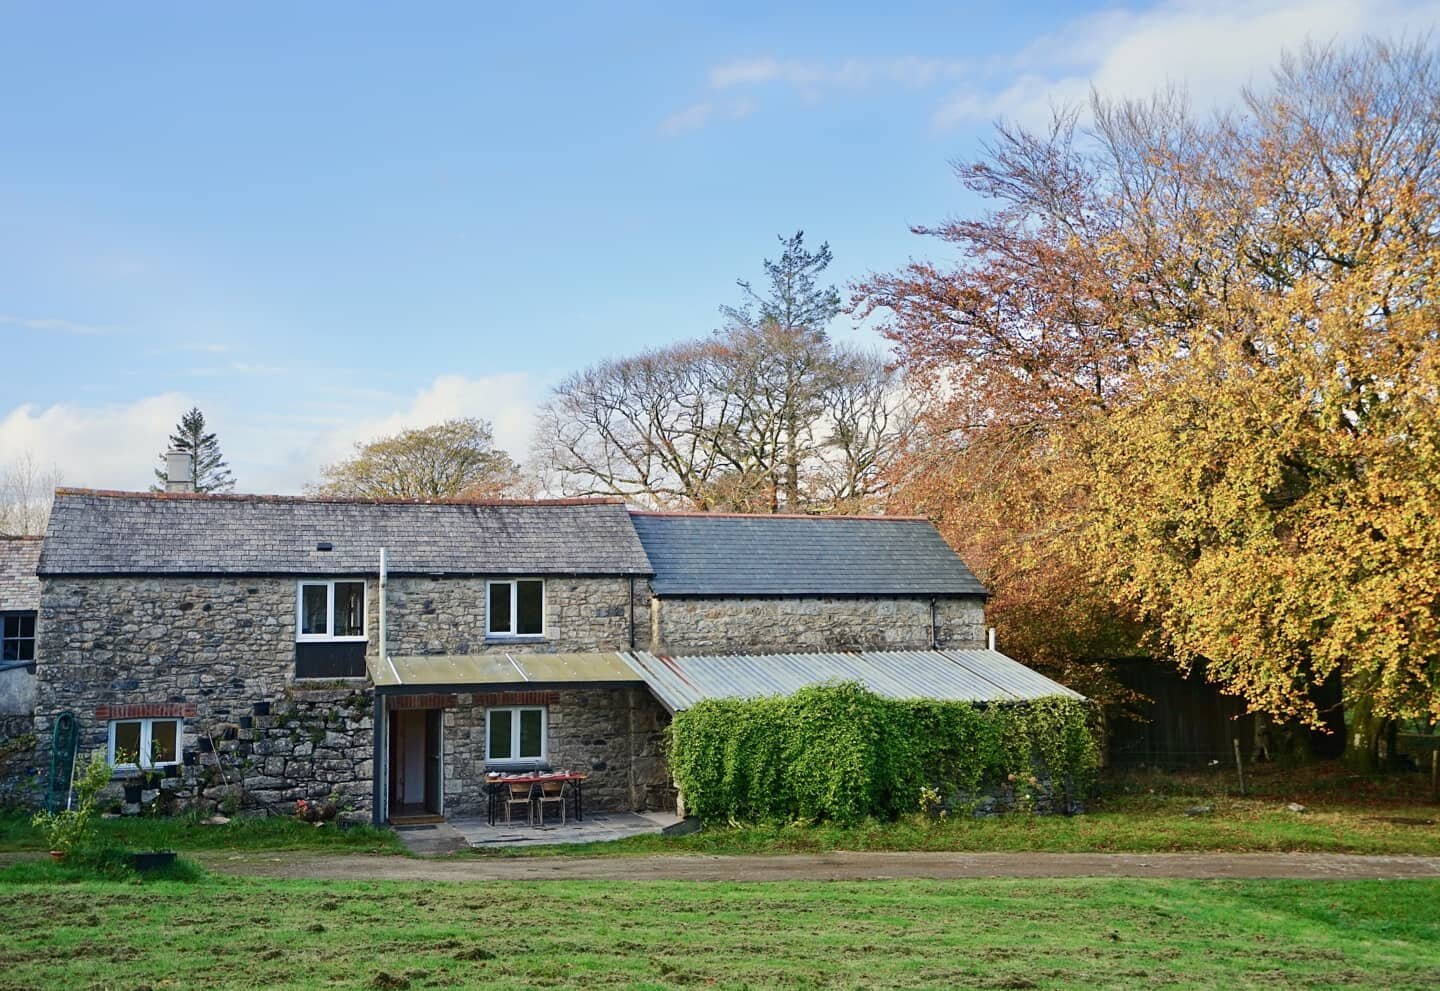 One of our lovely Dartmoor cottages is up for rent. It's perfect for a family with small children - 2 double bedrooms, a big south-facing garden, a wood burner and more. If you or someone you know would love to live in a wild, rural paradise whilst s